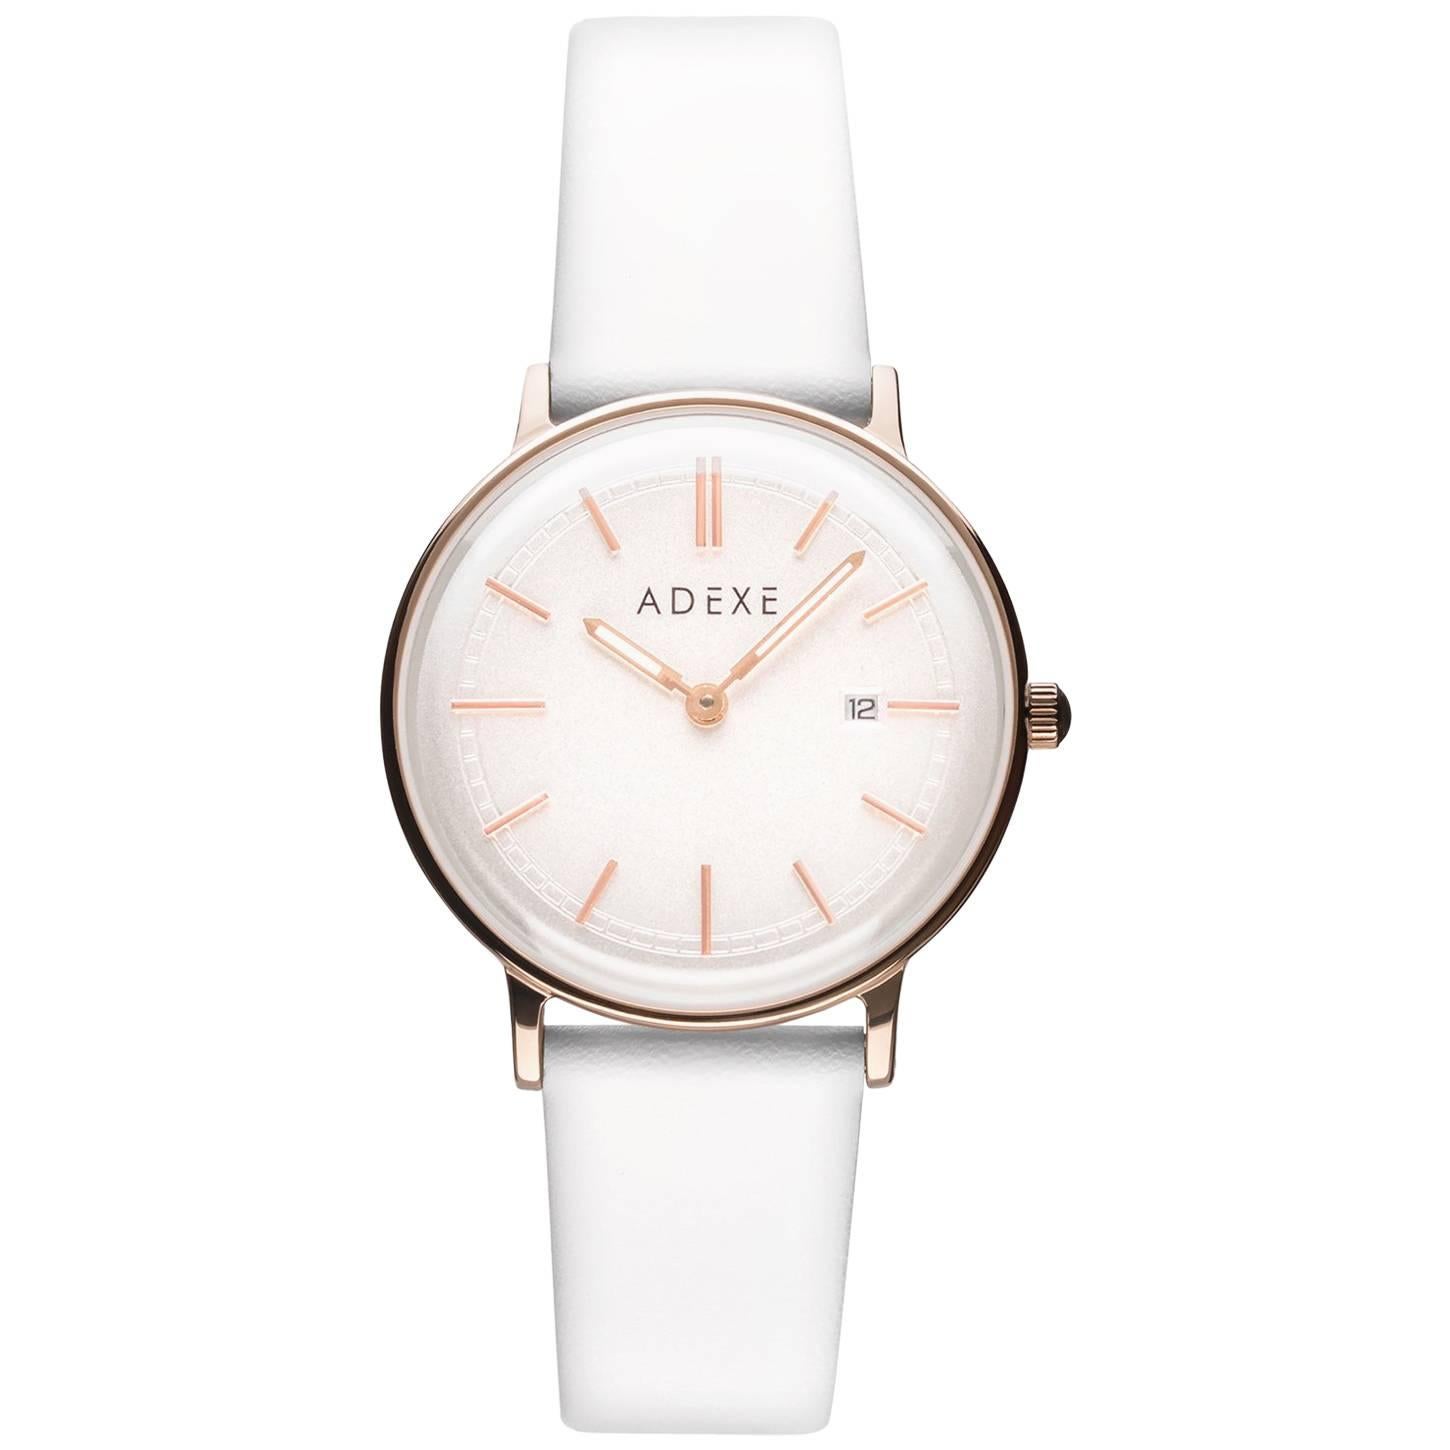 ADEXE White and Rose Gold Stainless Steel Meek Quartz Wristwatch For Sale